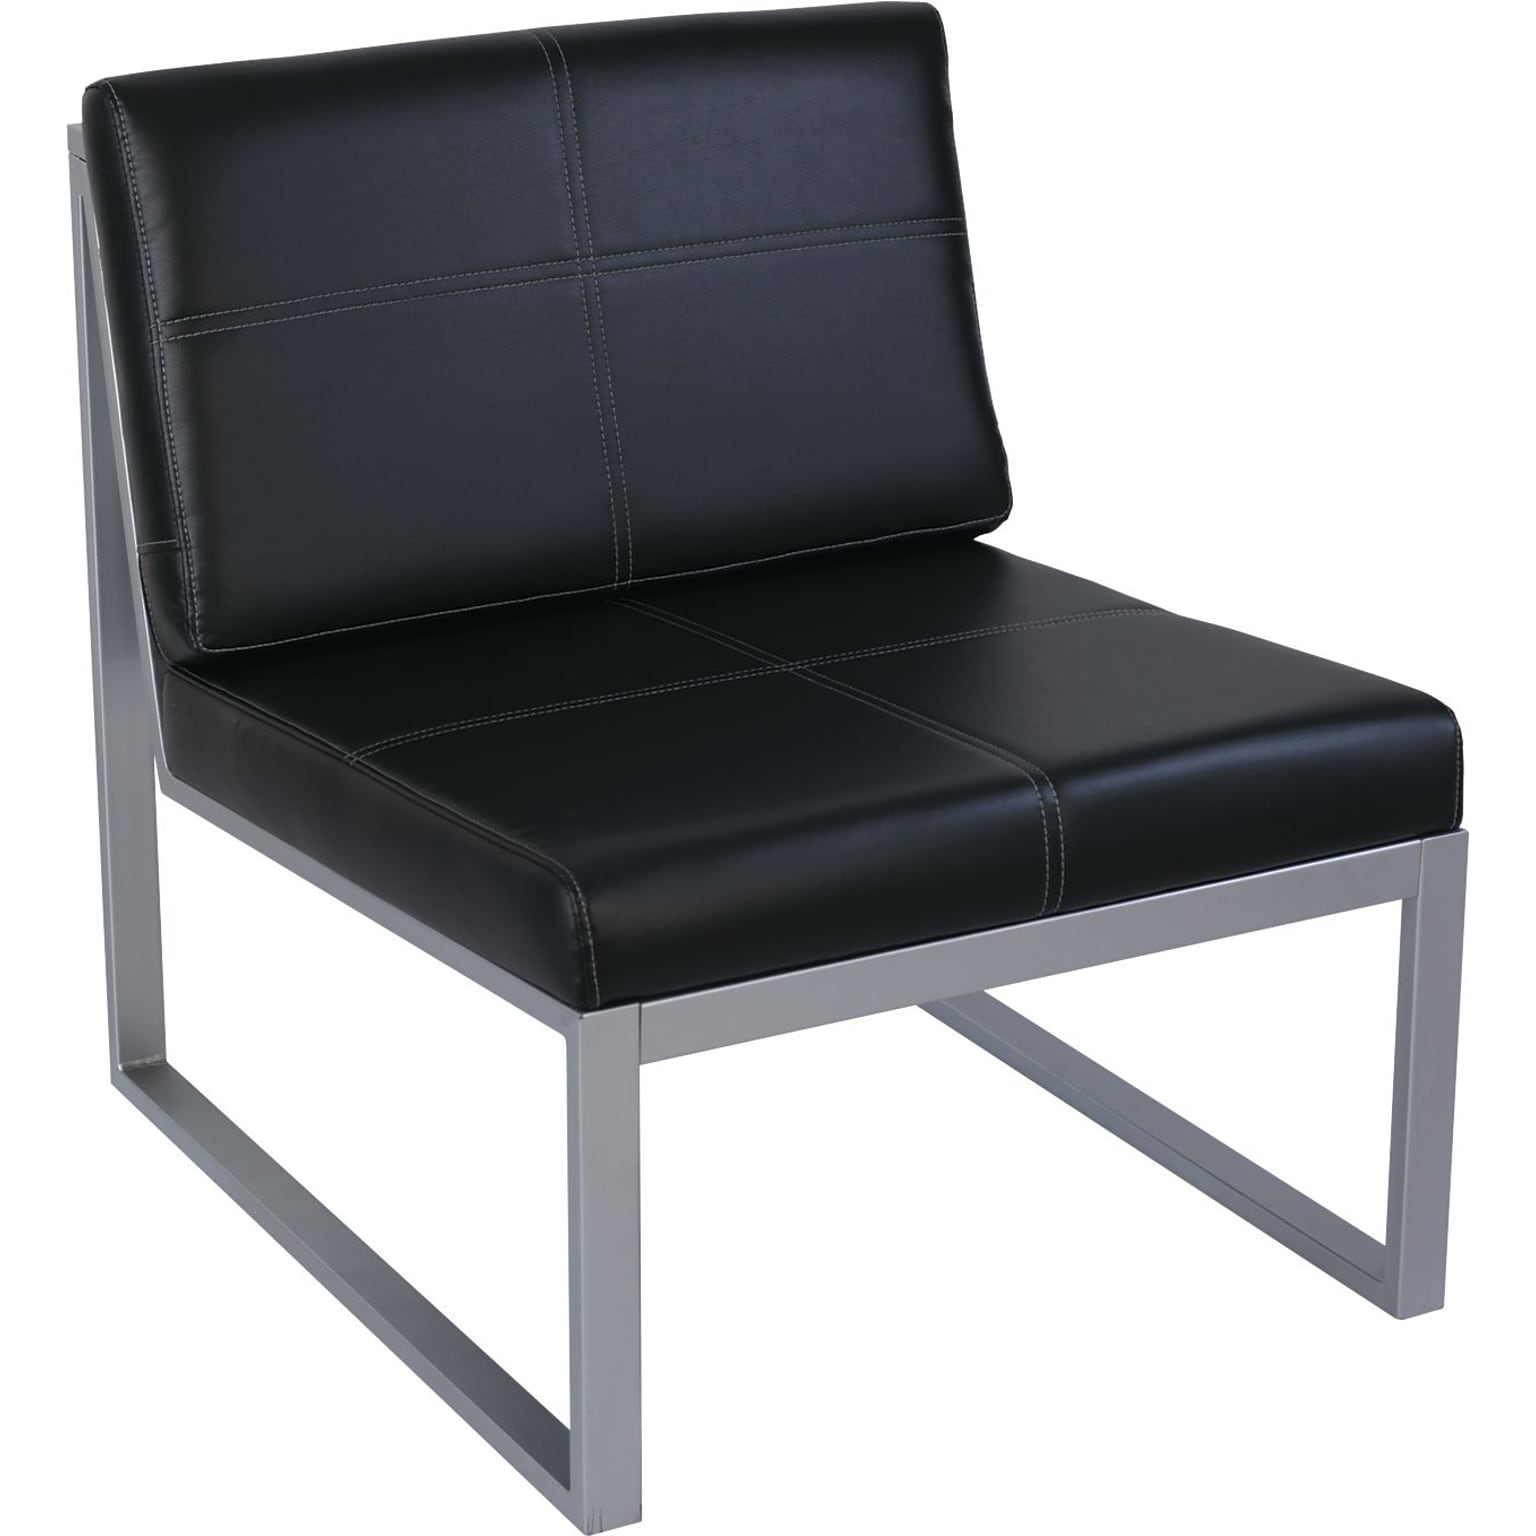 Alera® Reception Lounge Series Chair, Armless, Leather Cube Chair, Black